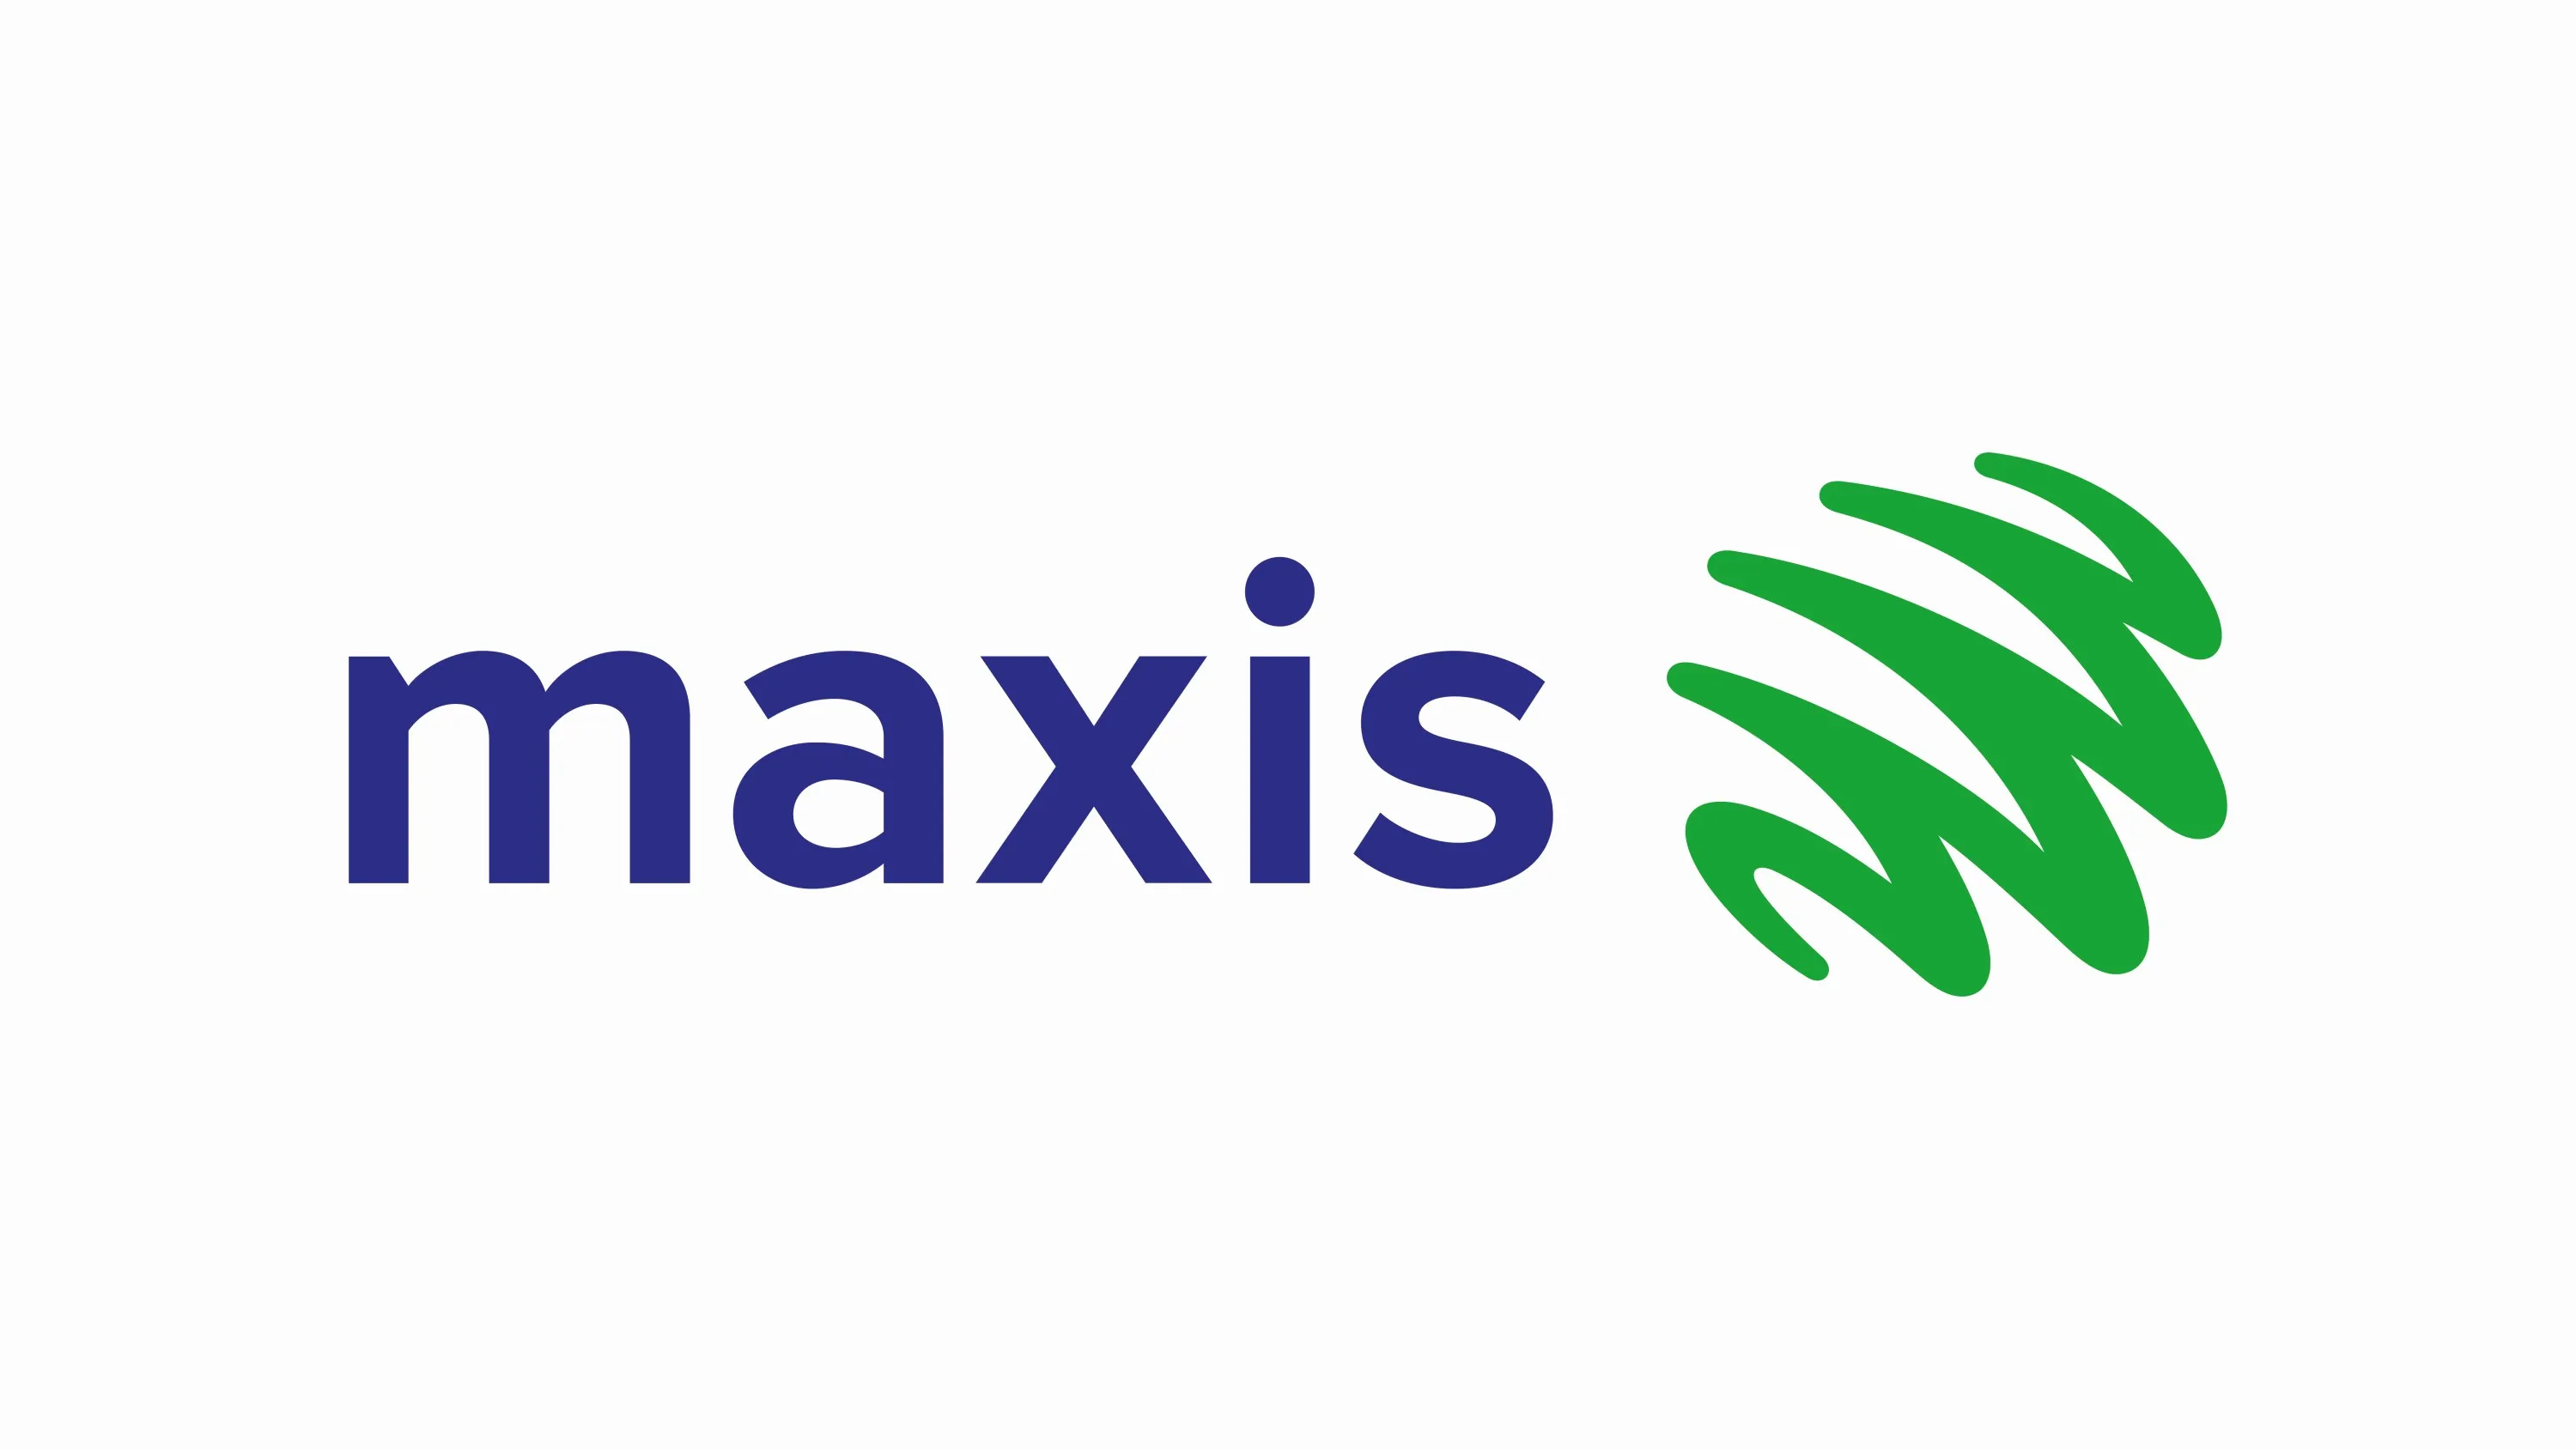 Maxis delivers growth across all segments in Q3